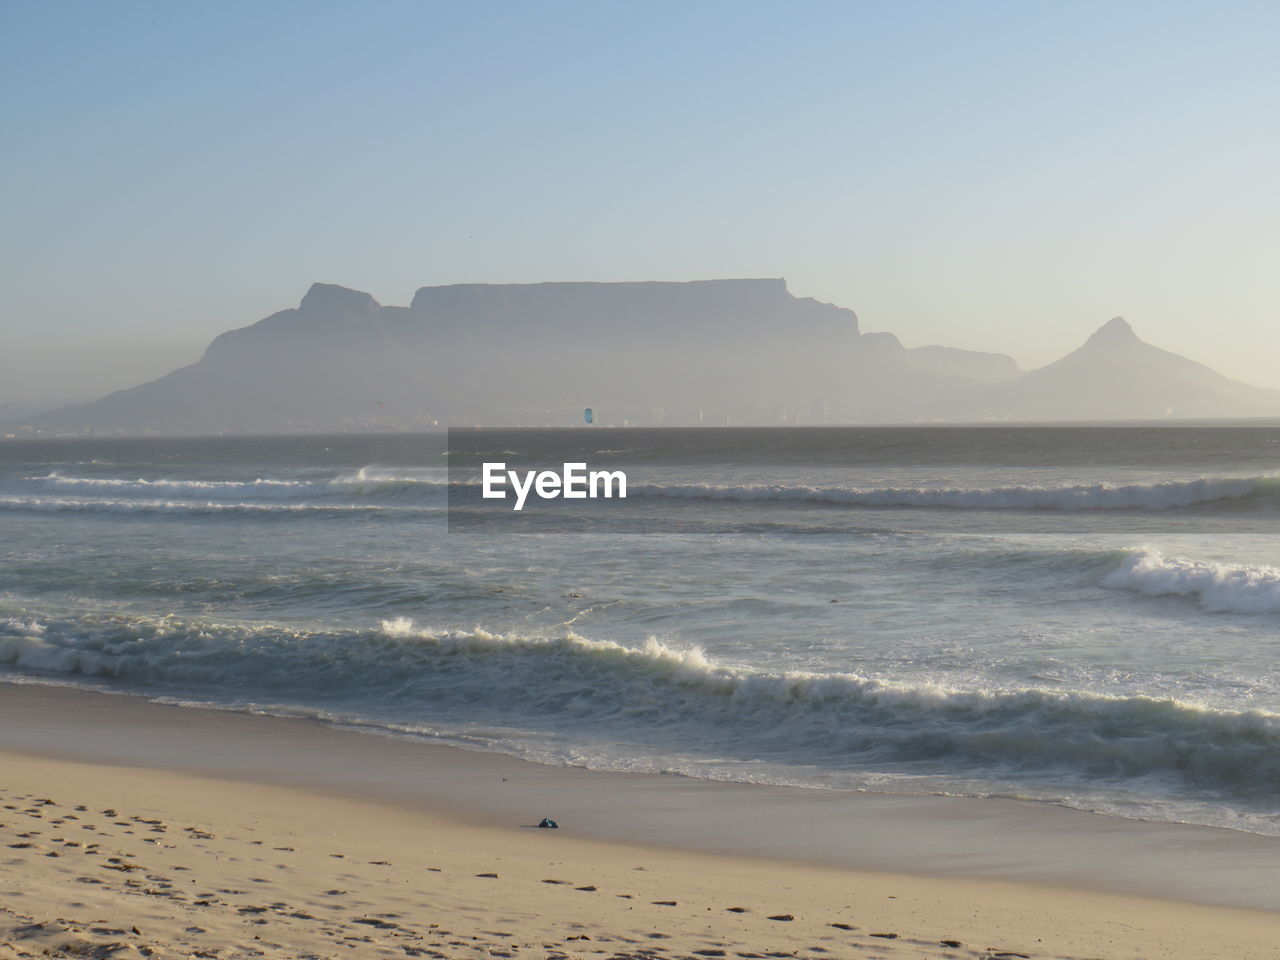 Table mountain from across the bay... 